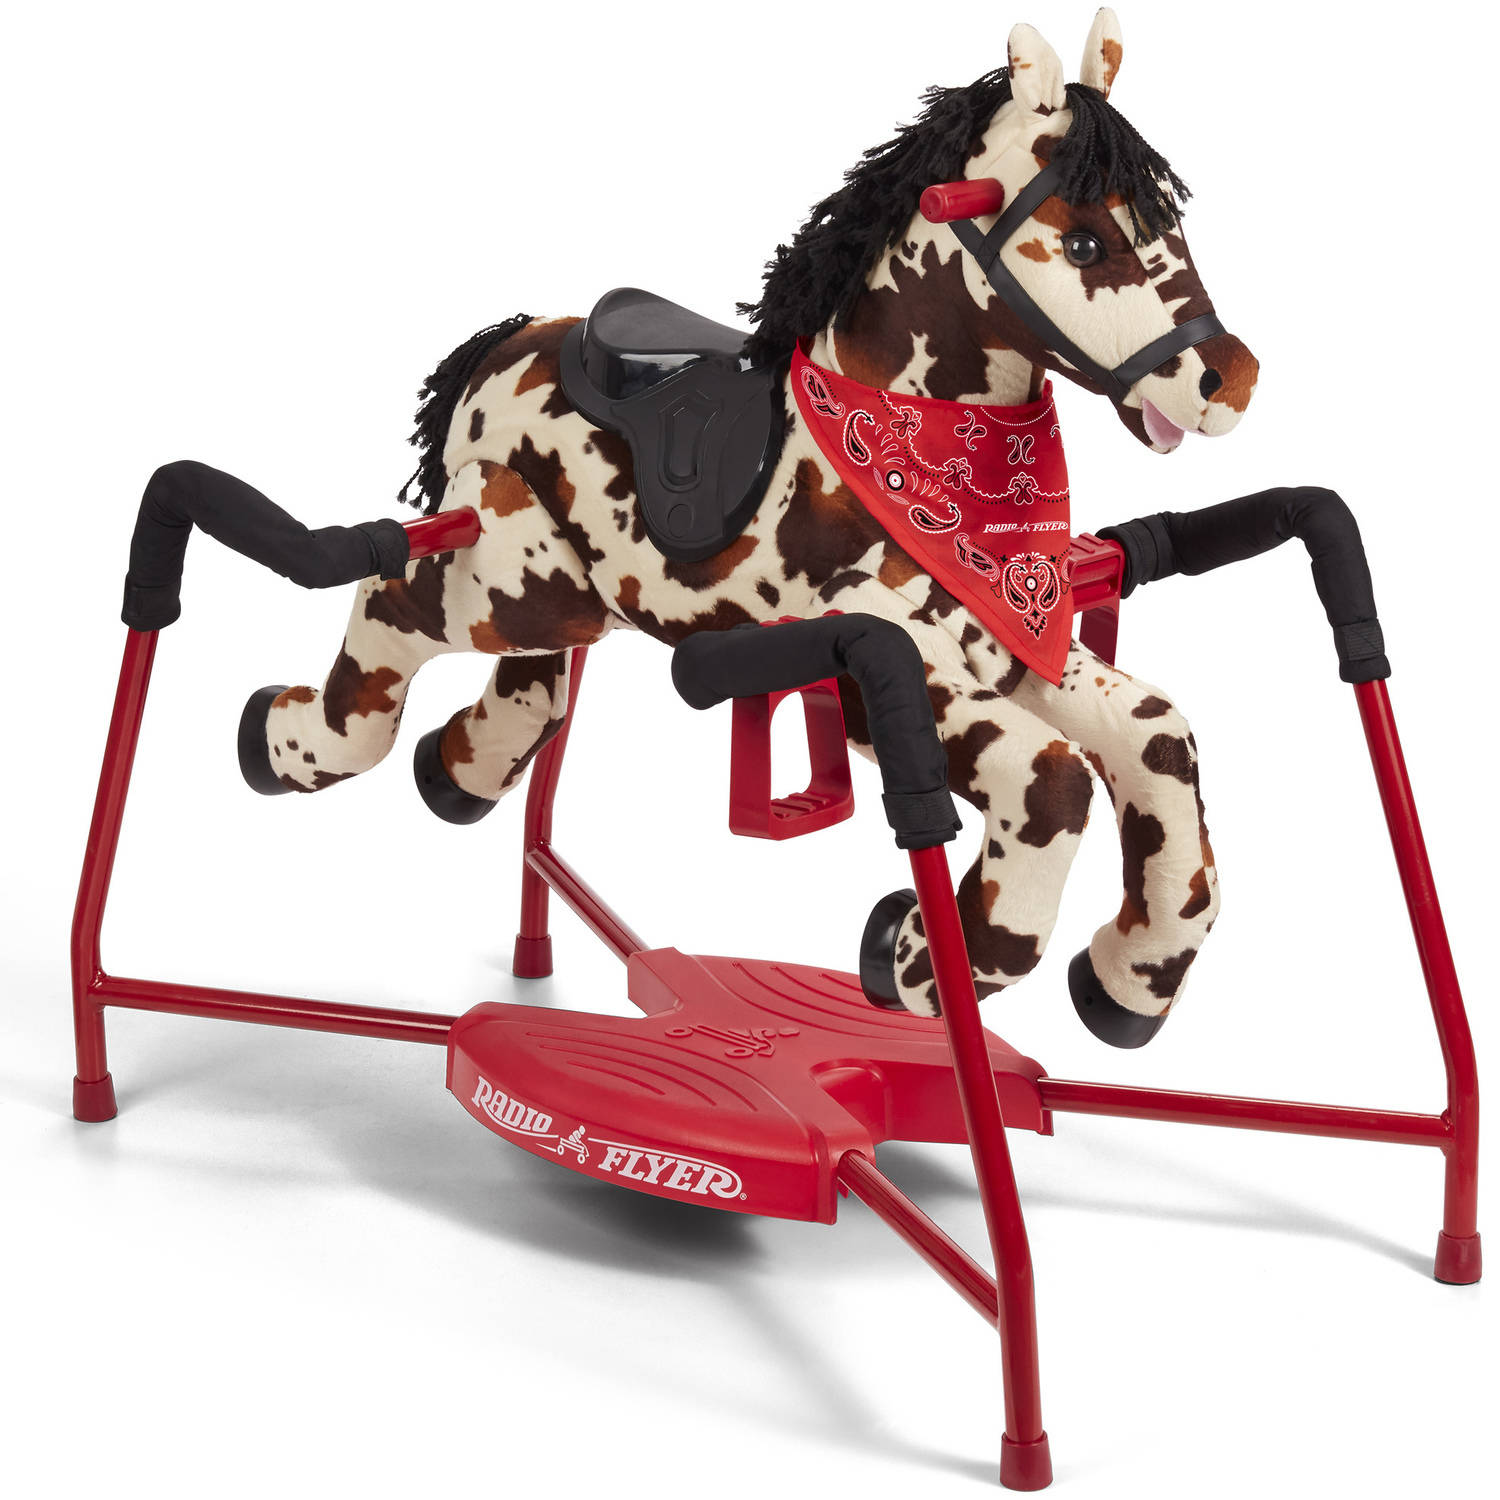 Radio Flyer, Freckles Interactive Spring Horse, Ride-on for Boys and Girls, for Kids 2 - 6 years old - image 1 of 18